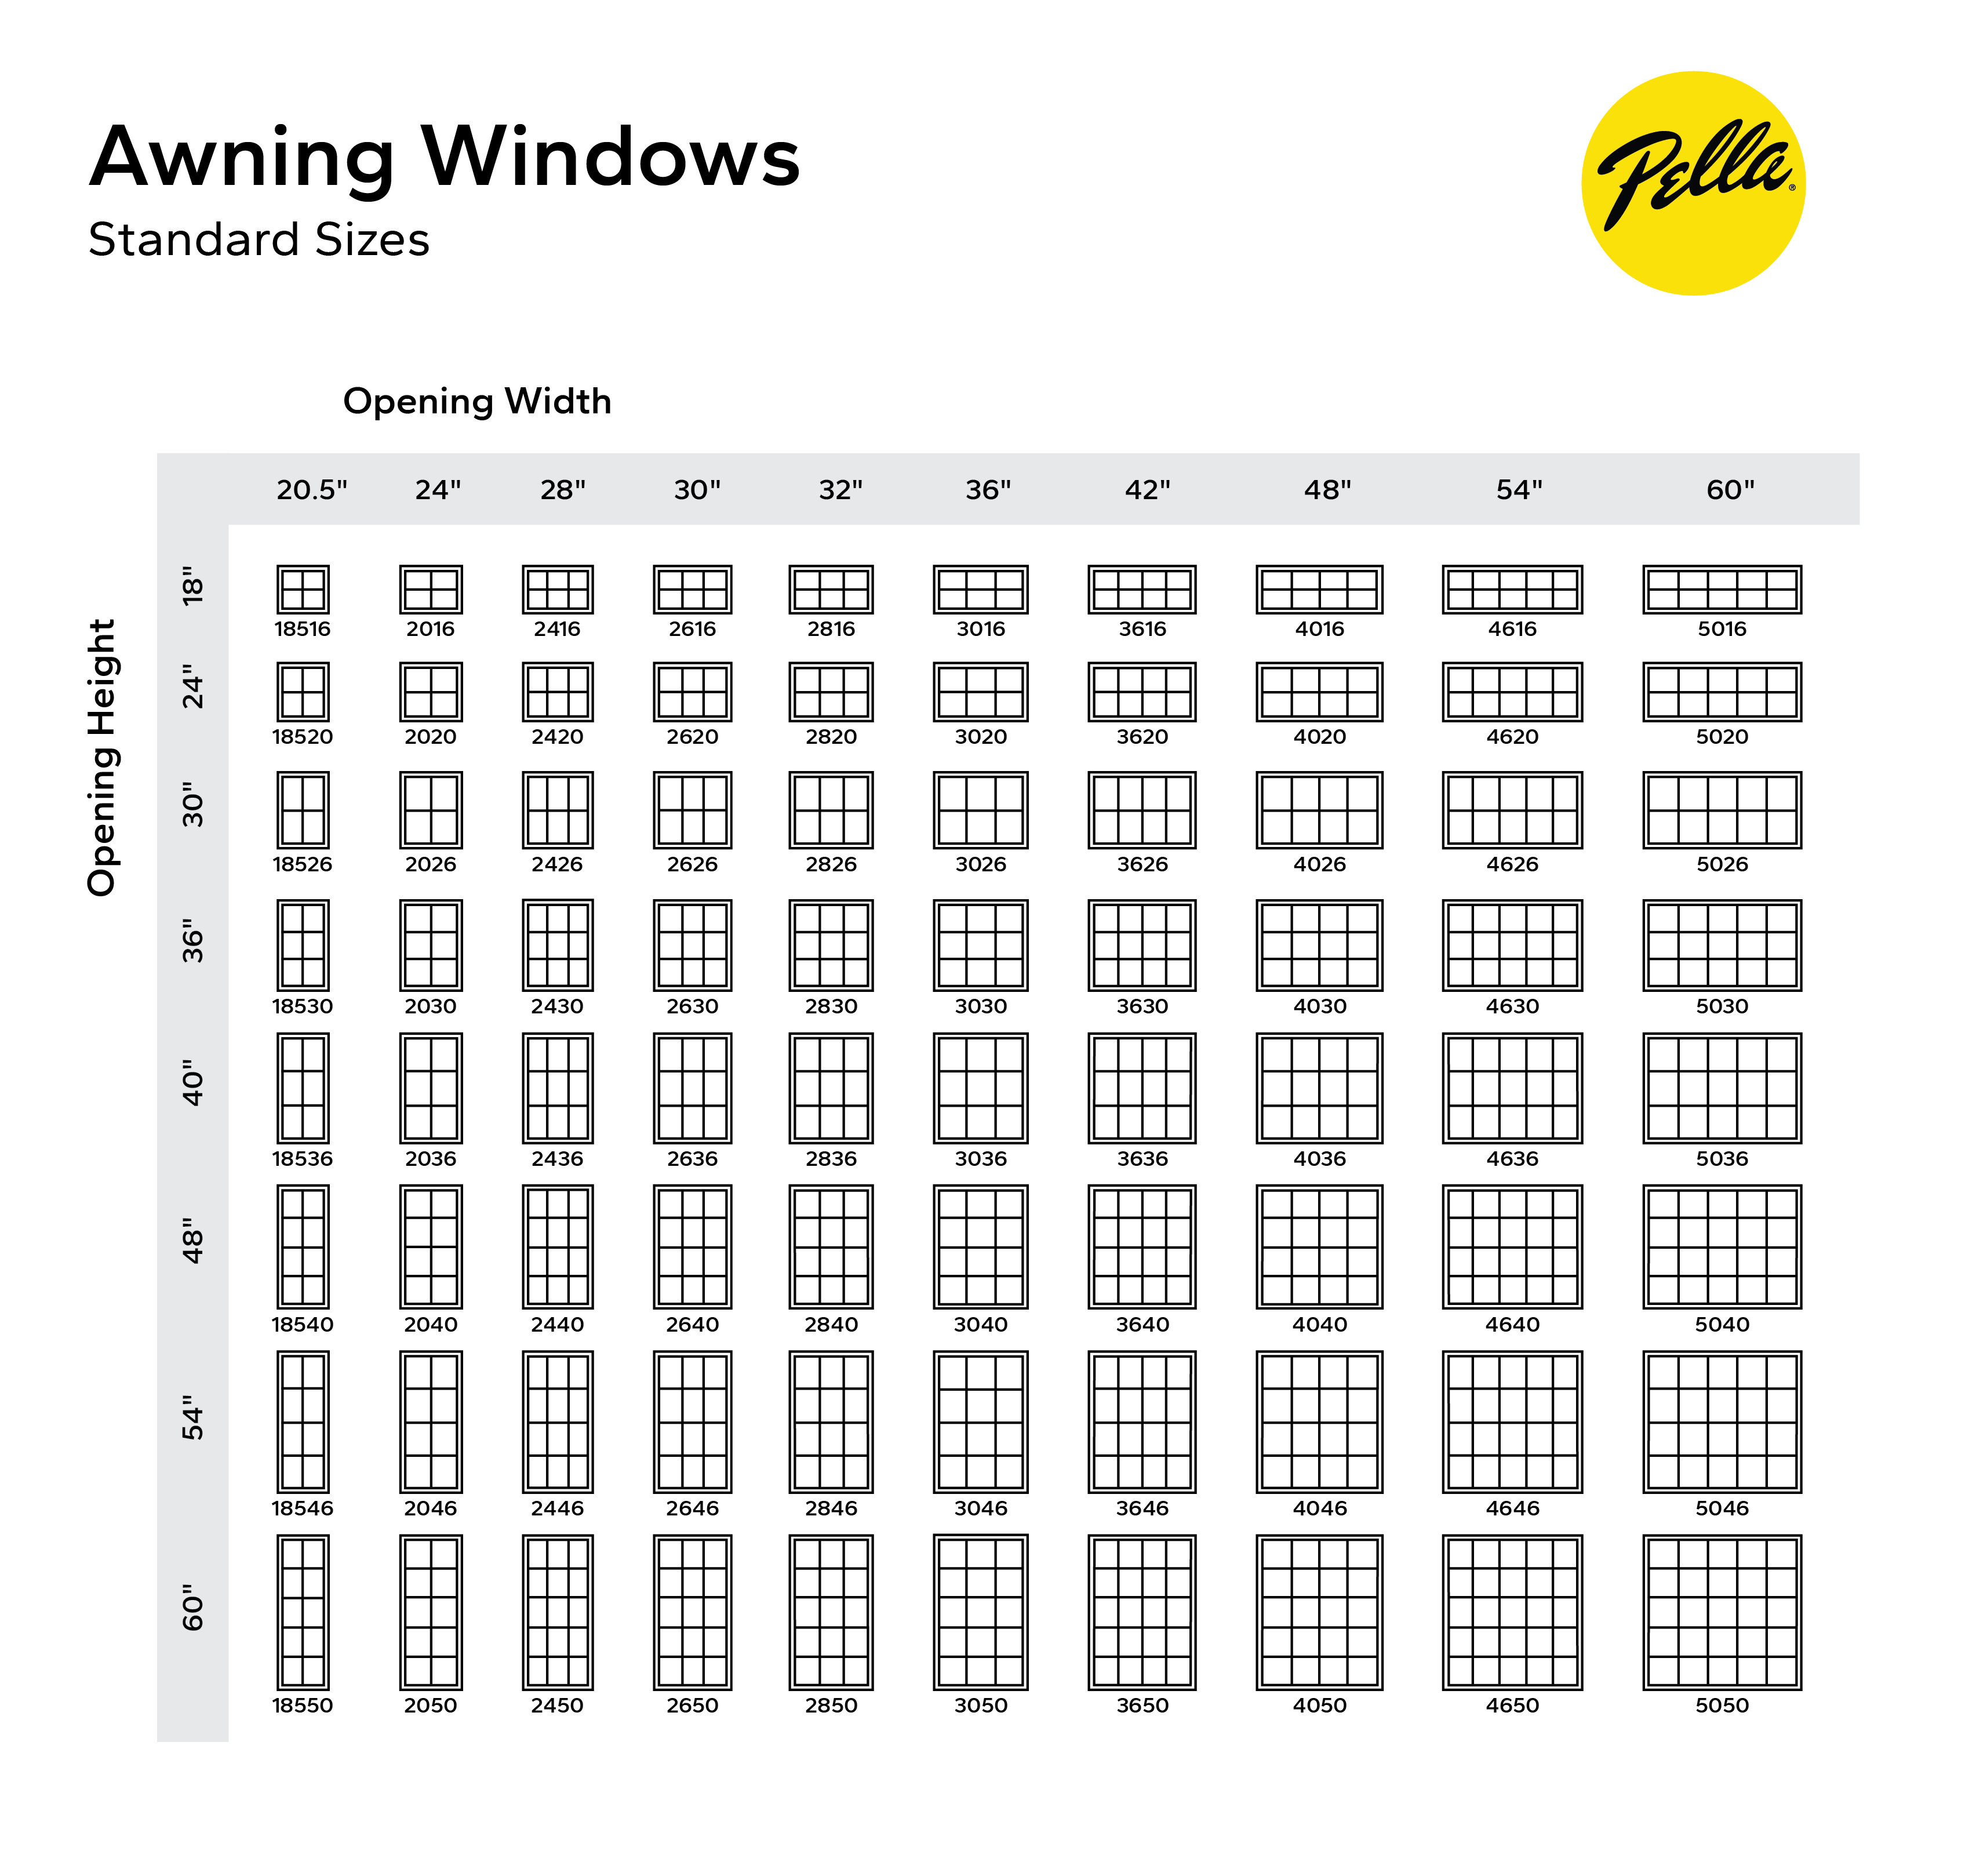 standard window sizes for awning windows